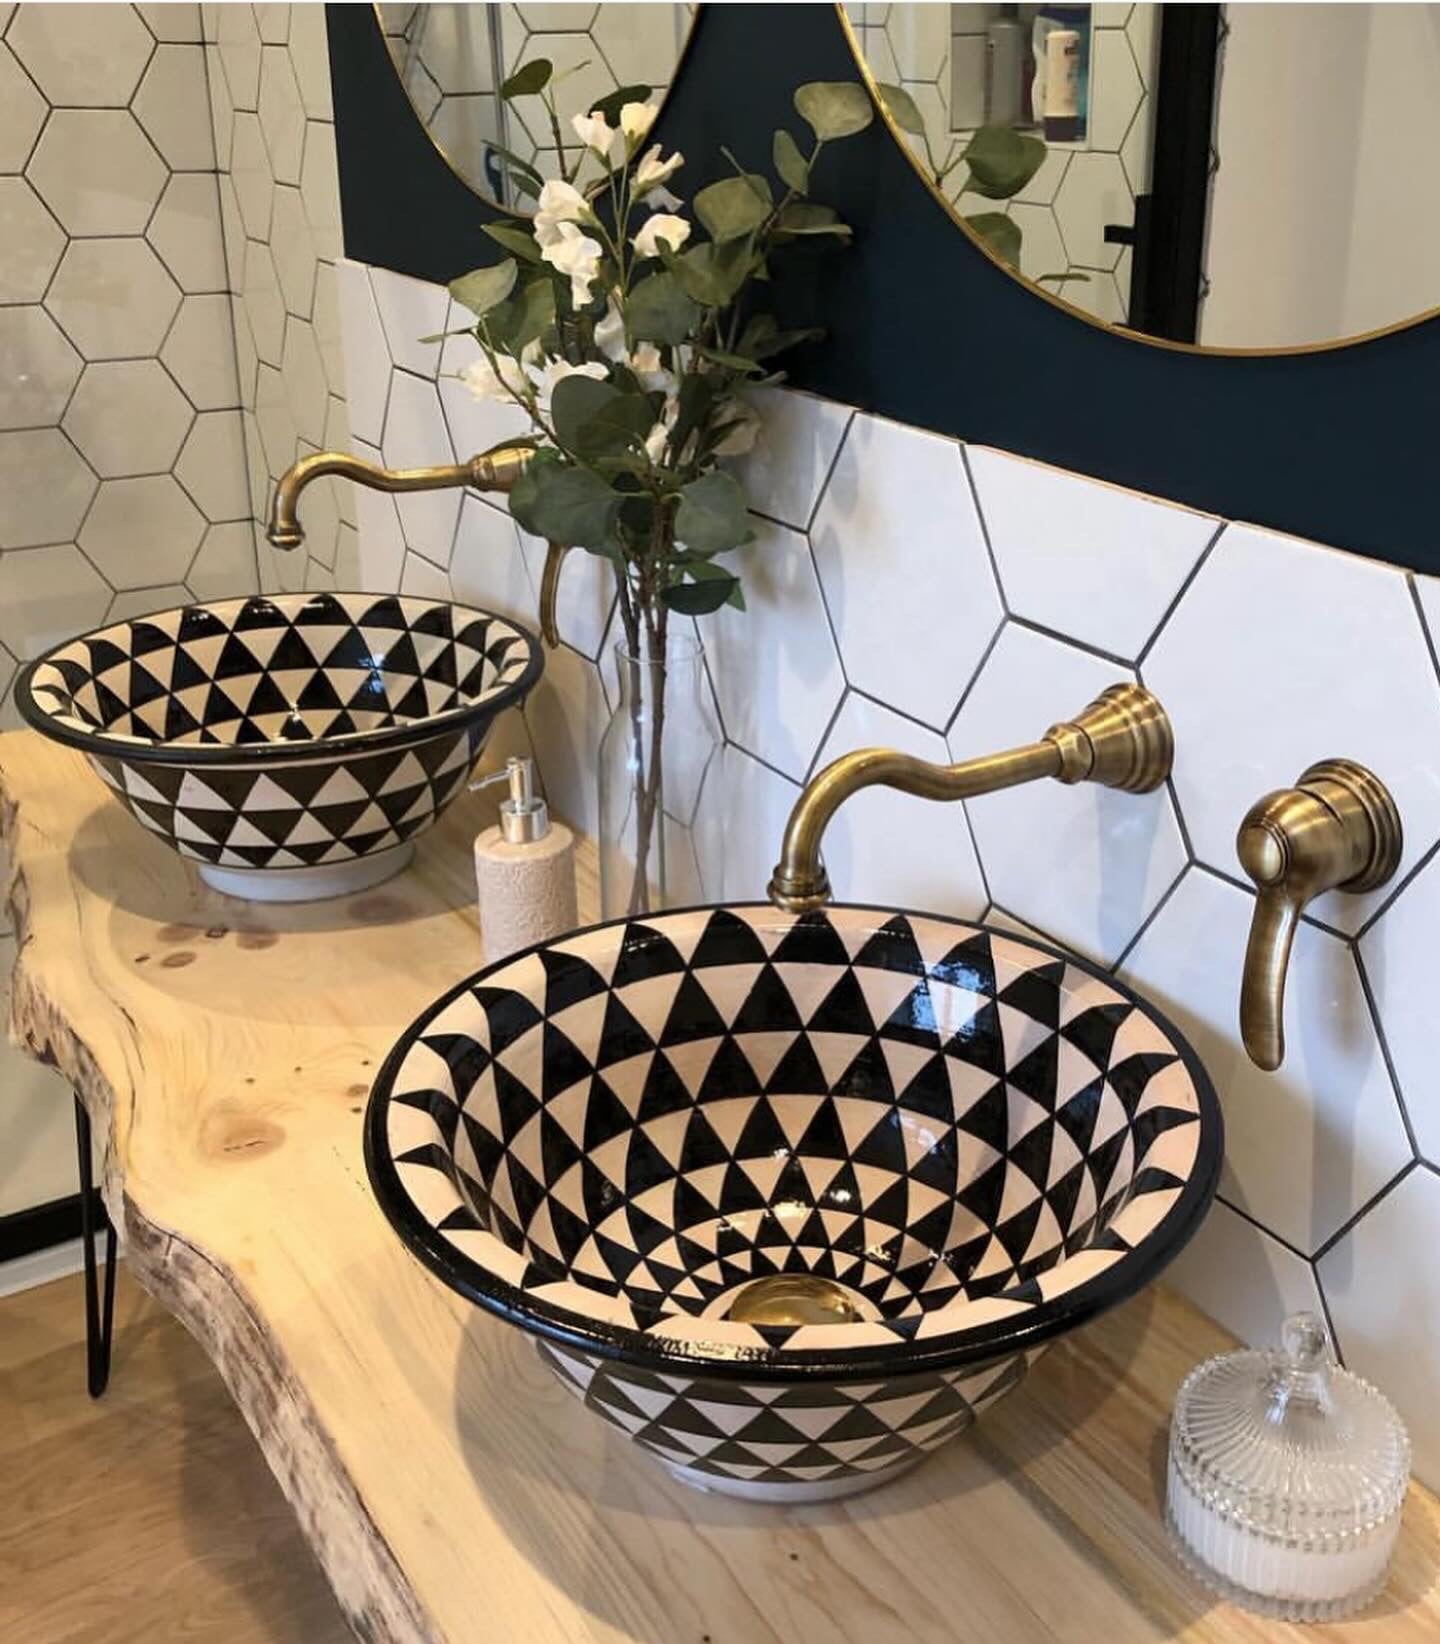 Moroccan sink | moroccan ceramic sink | bathroom sink | moroccan bathroom basin | moroccan sink bowl | black and white sink bowl #37